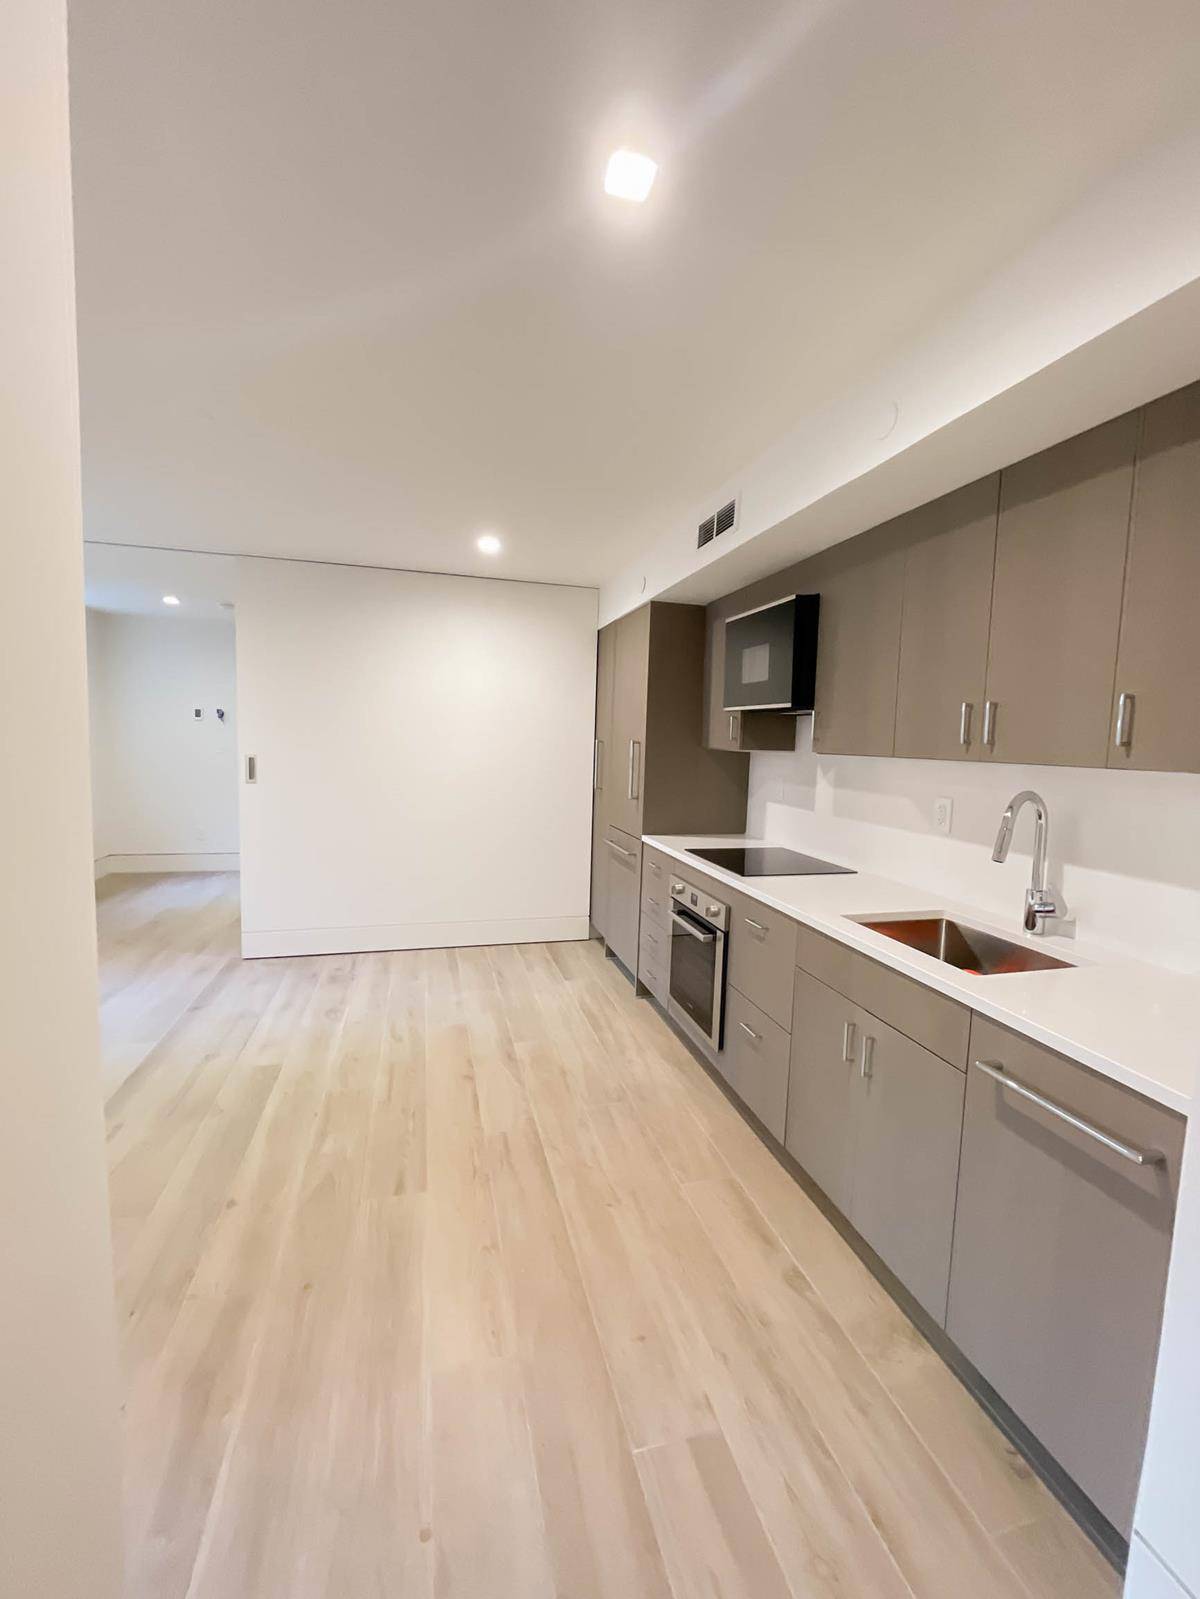 NEW TO MARKET GUT RENOVATED 1 BEDROOM APARTMENT IN TOWNHOUSE WITH OUTDOOR SPACE.